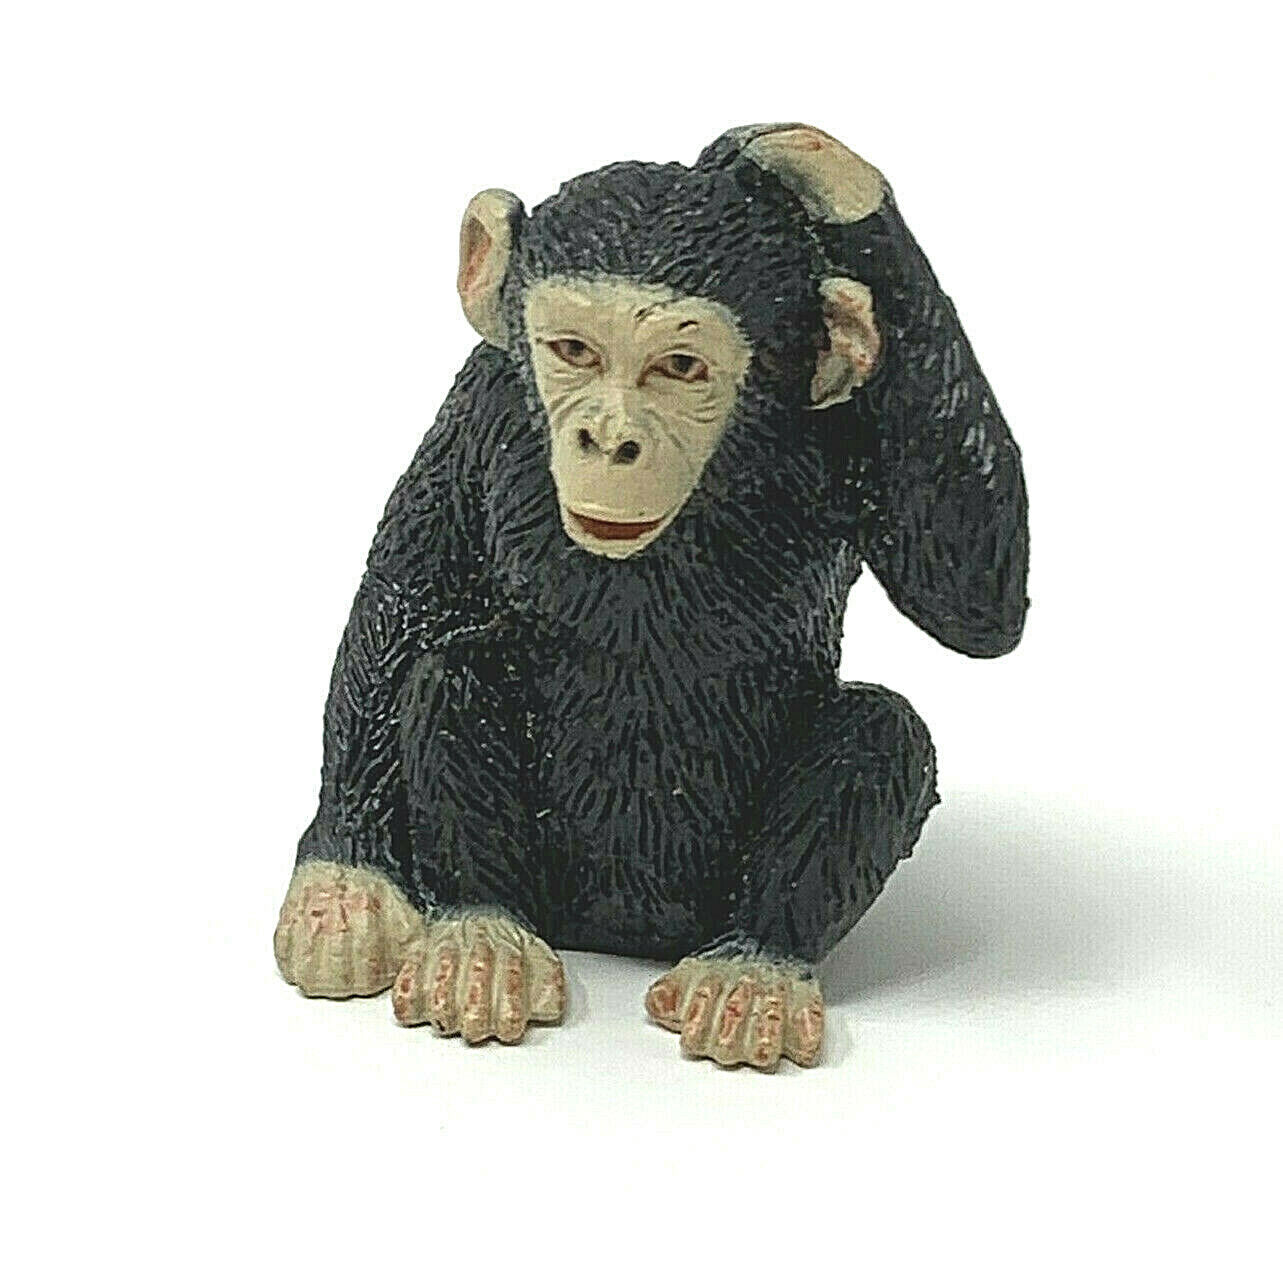 YOWIE Chimpanzee Collectible Toy Animal Figurine Rescue Collection 1 3/4